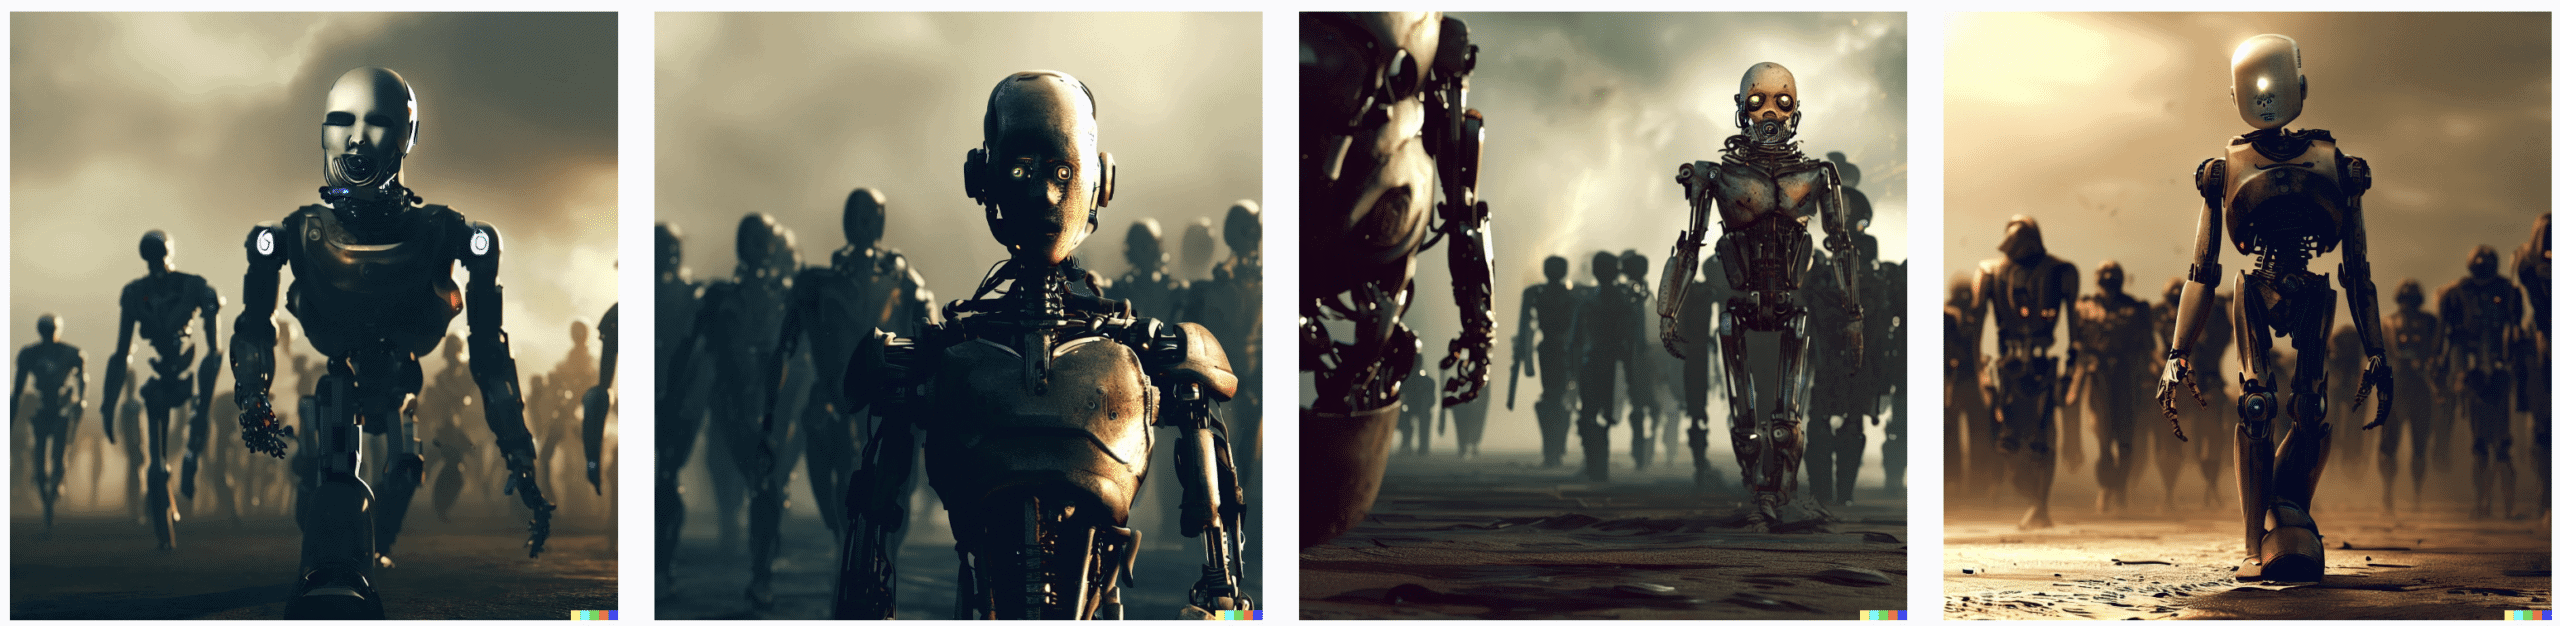 DALL-E 2 experimental update image of a robot with a human face walking towards a group of other robots in the theme of "I am Legend" very apocalyptic-like. 4k photorealistic picture